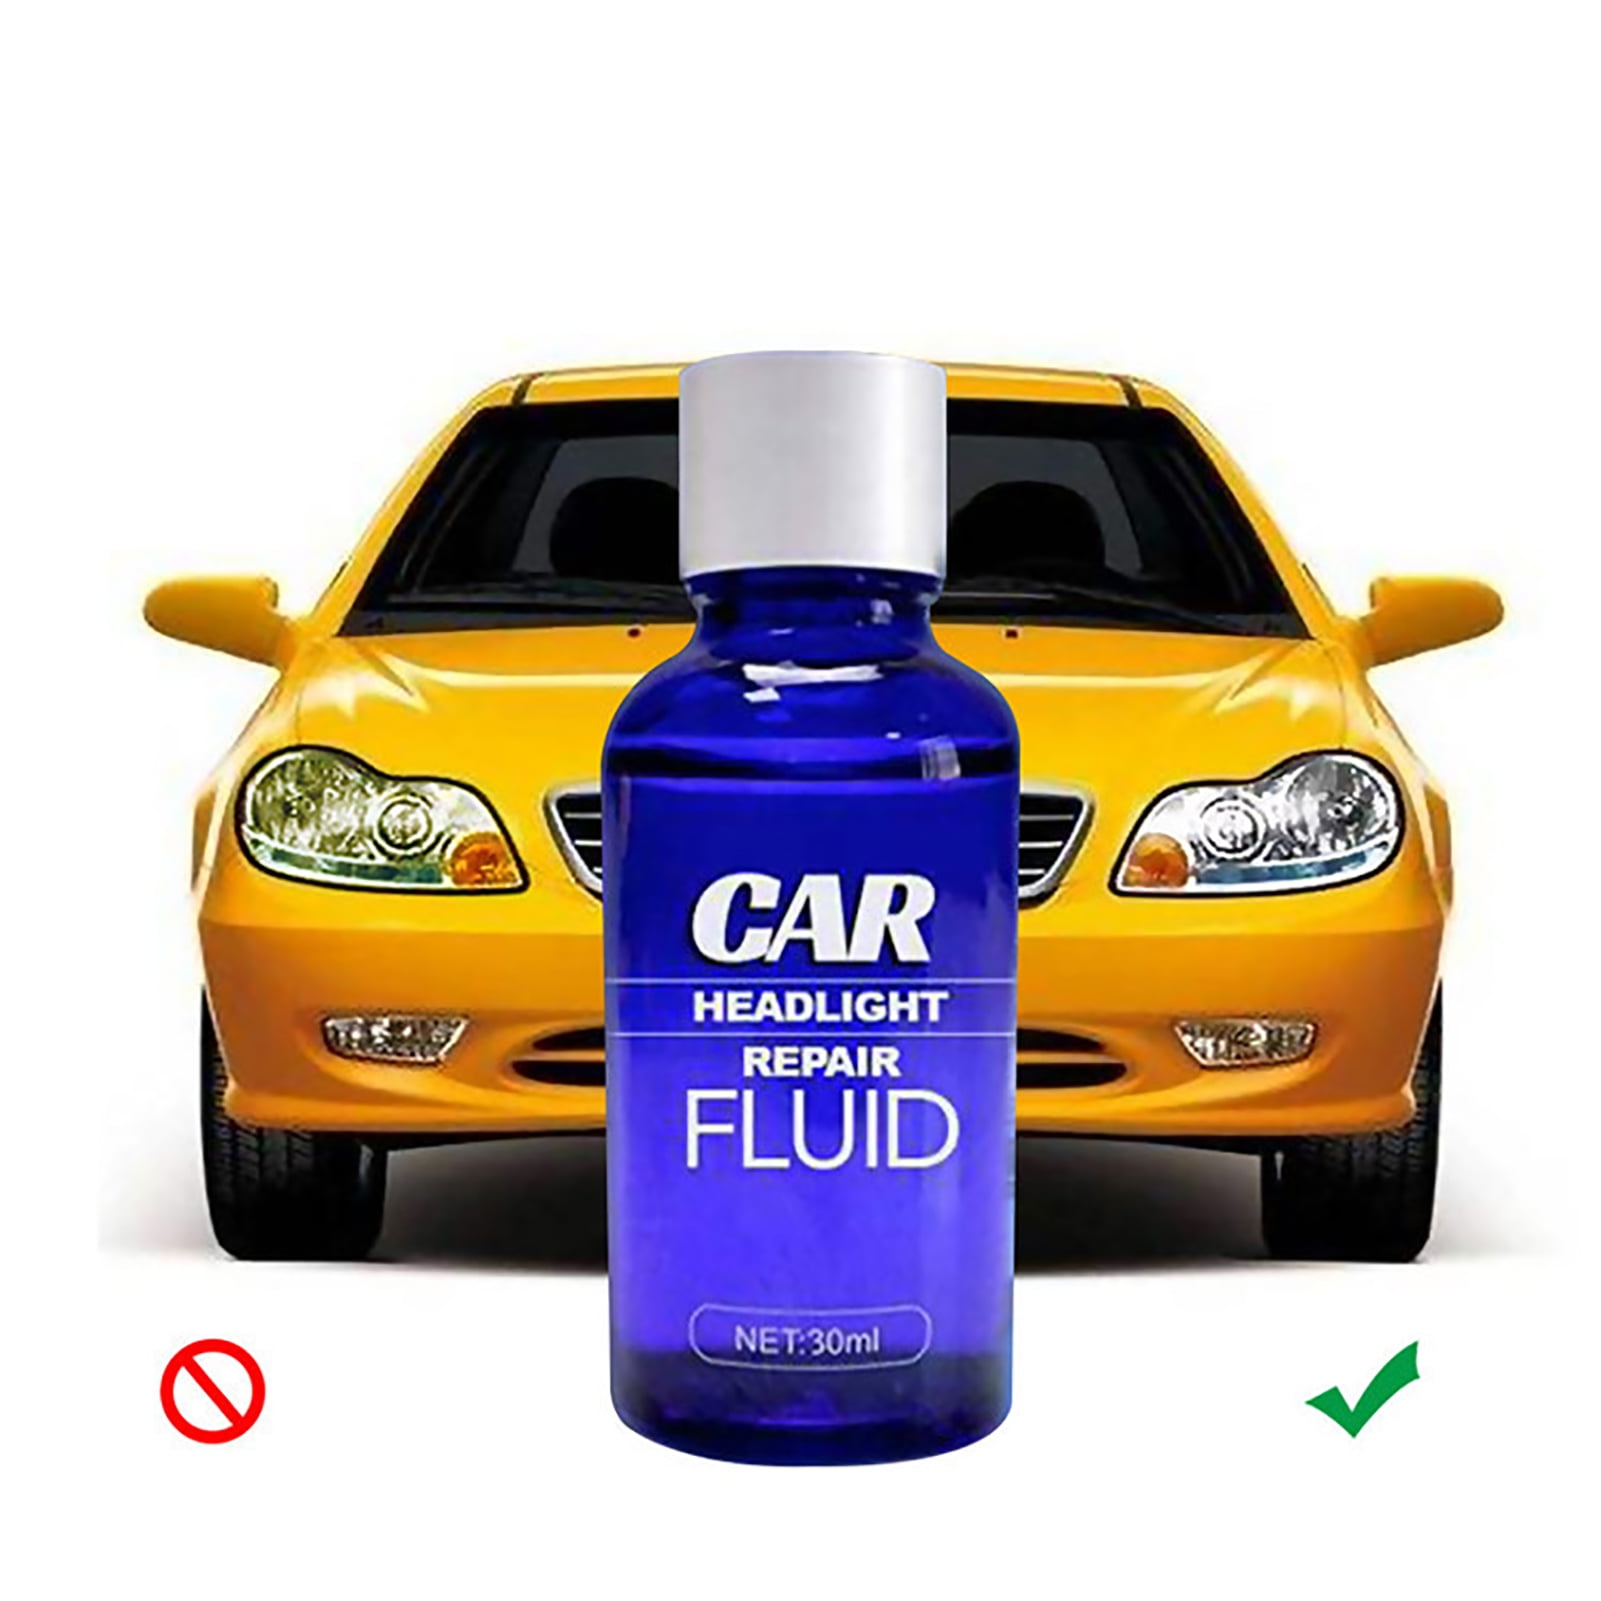 Houyhm Car Cleaning Gel, Universal Dust Cleaning Gel for Electronic Devices  Keyboard, Cleaner Gel for Car Interiors/Crevice and Home Office Items